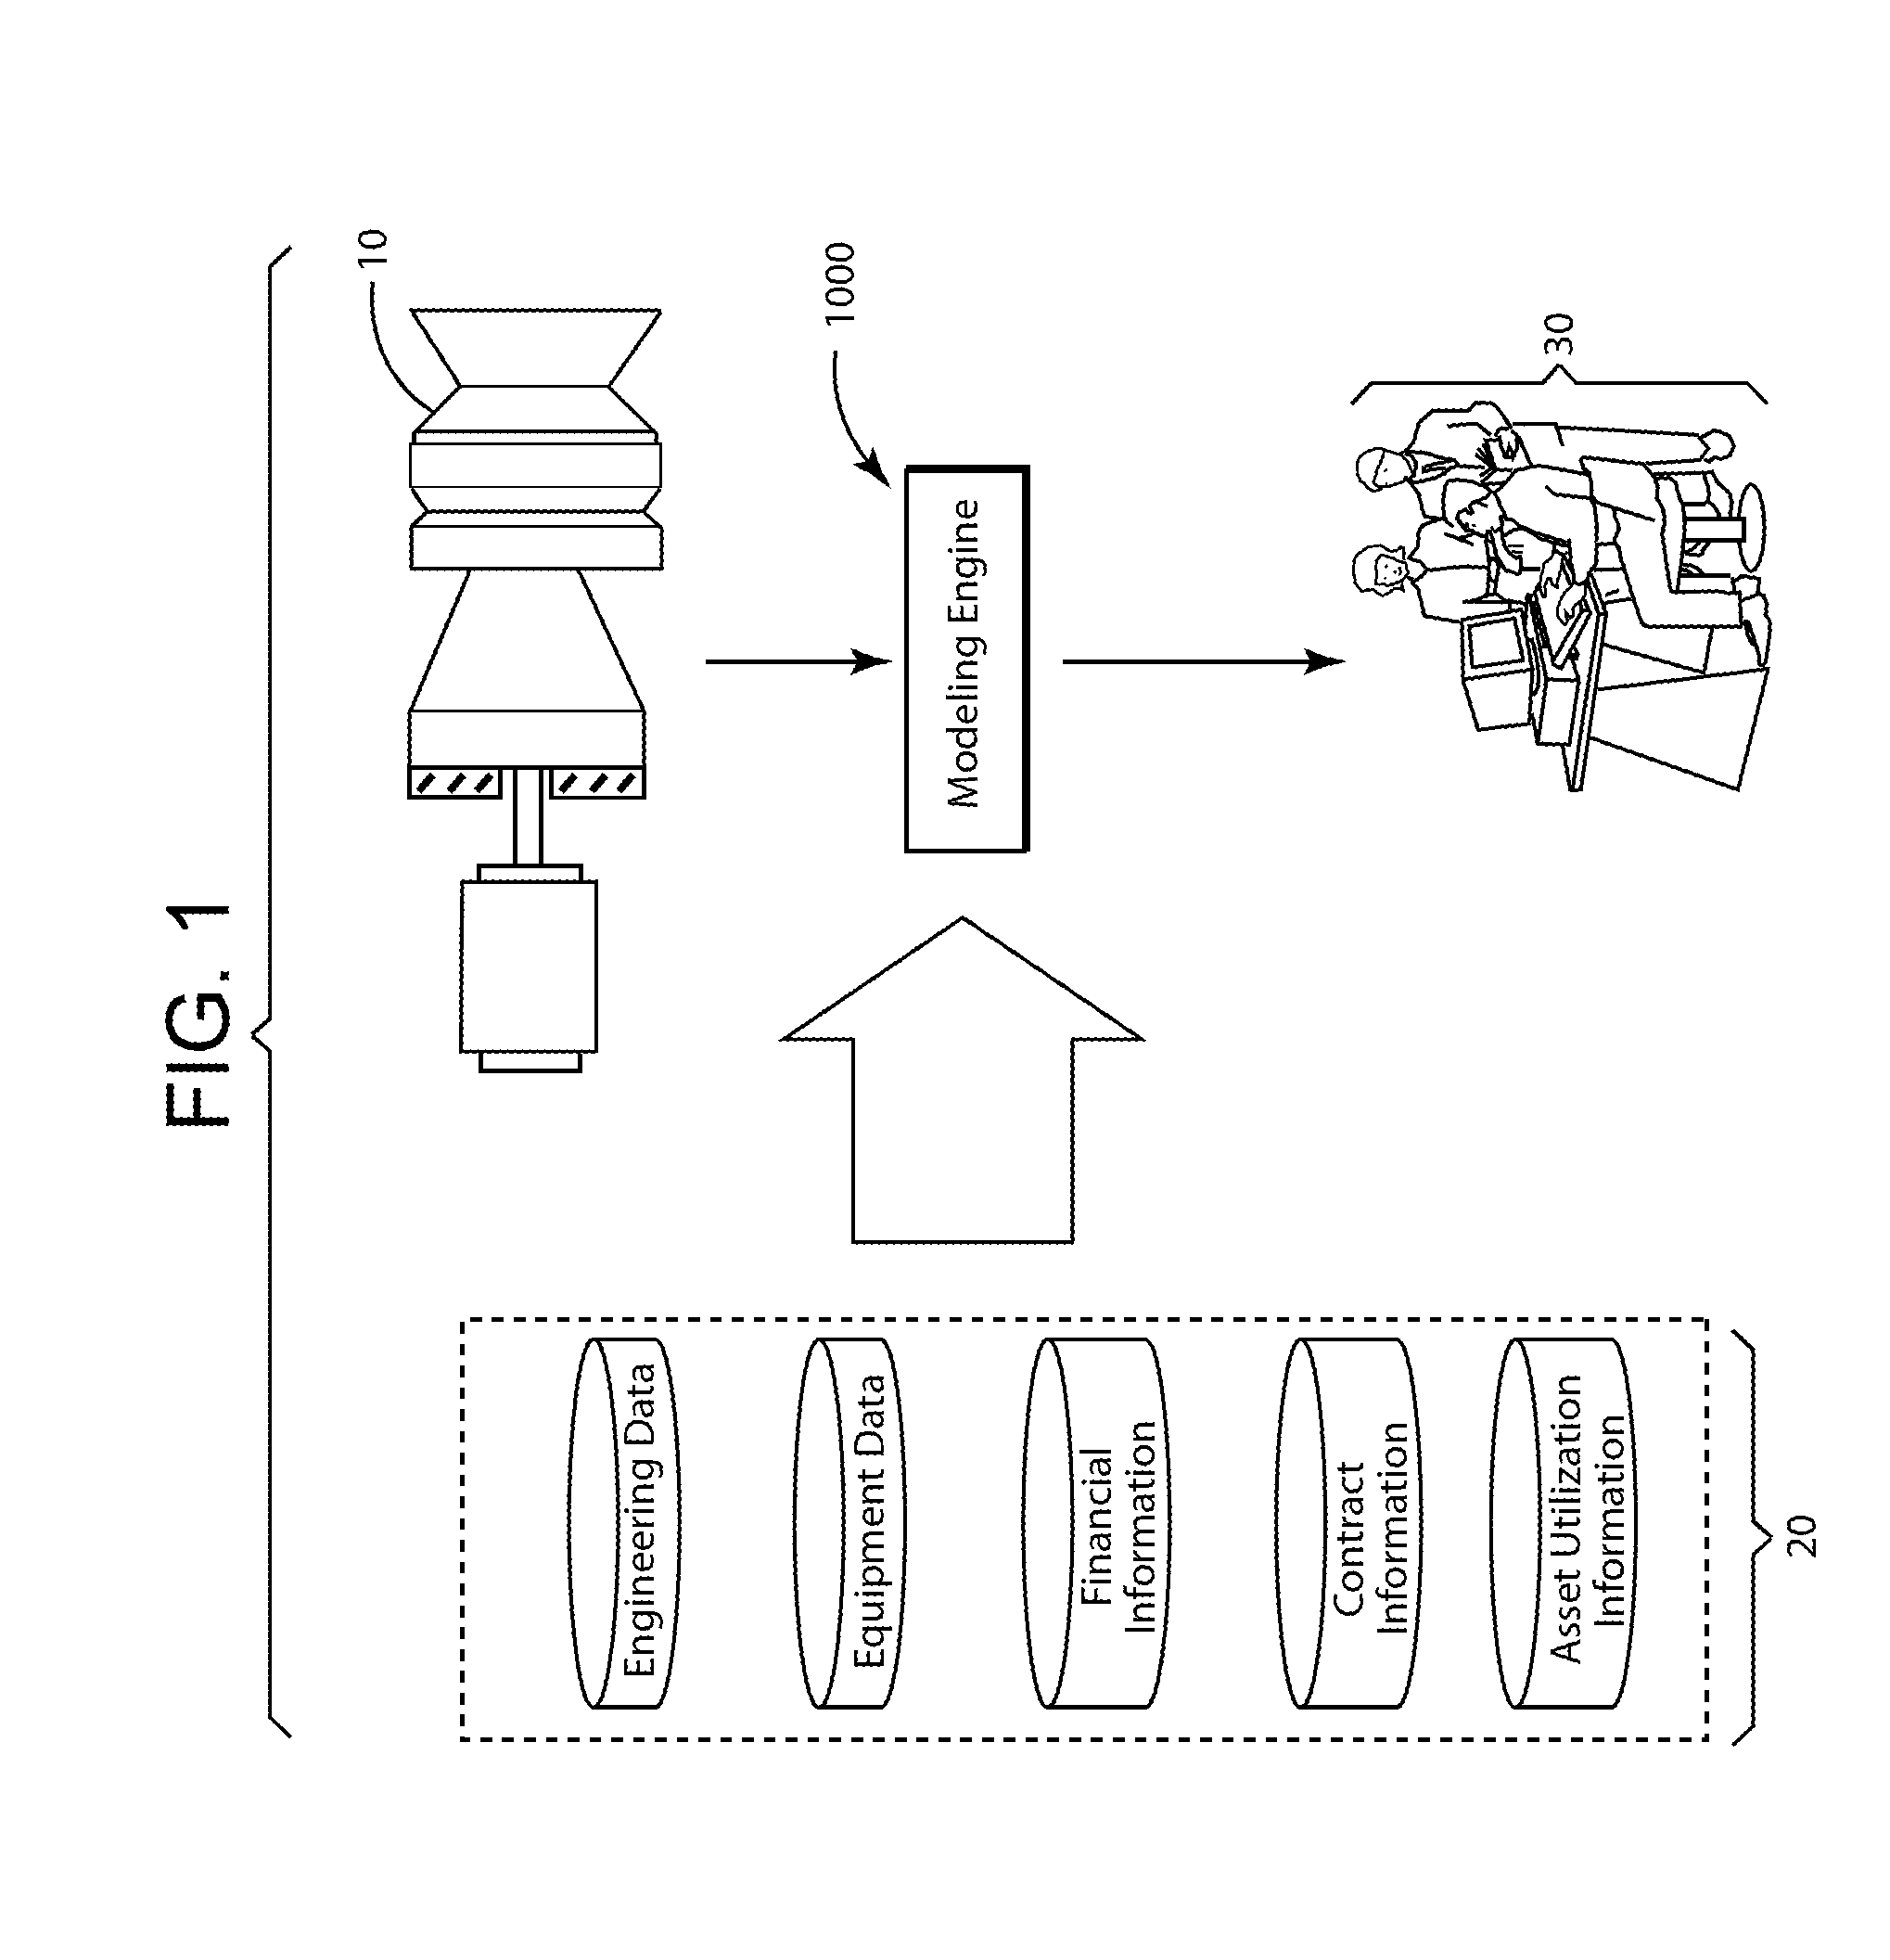 Method and system for modeling the financial requirements of an industrial machine